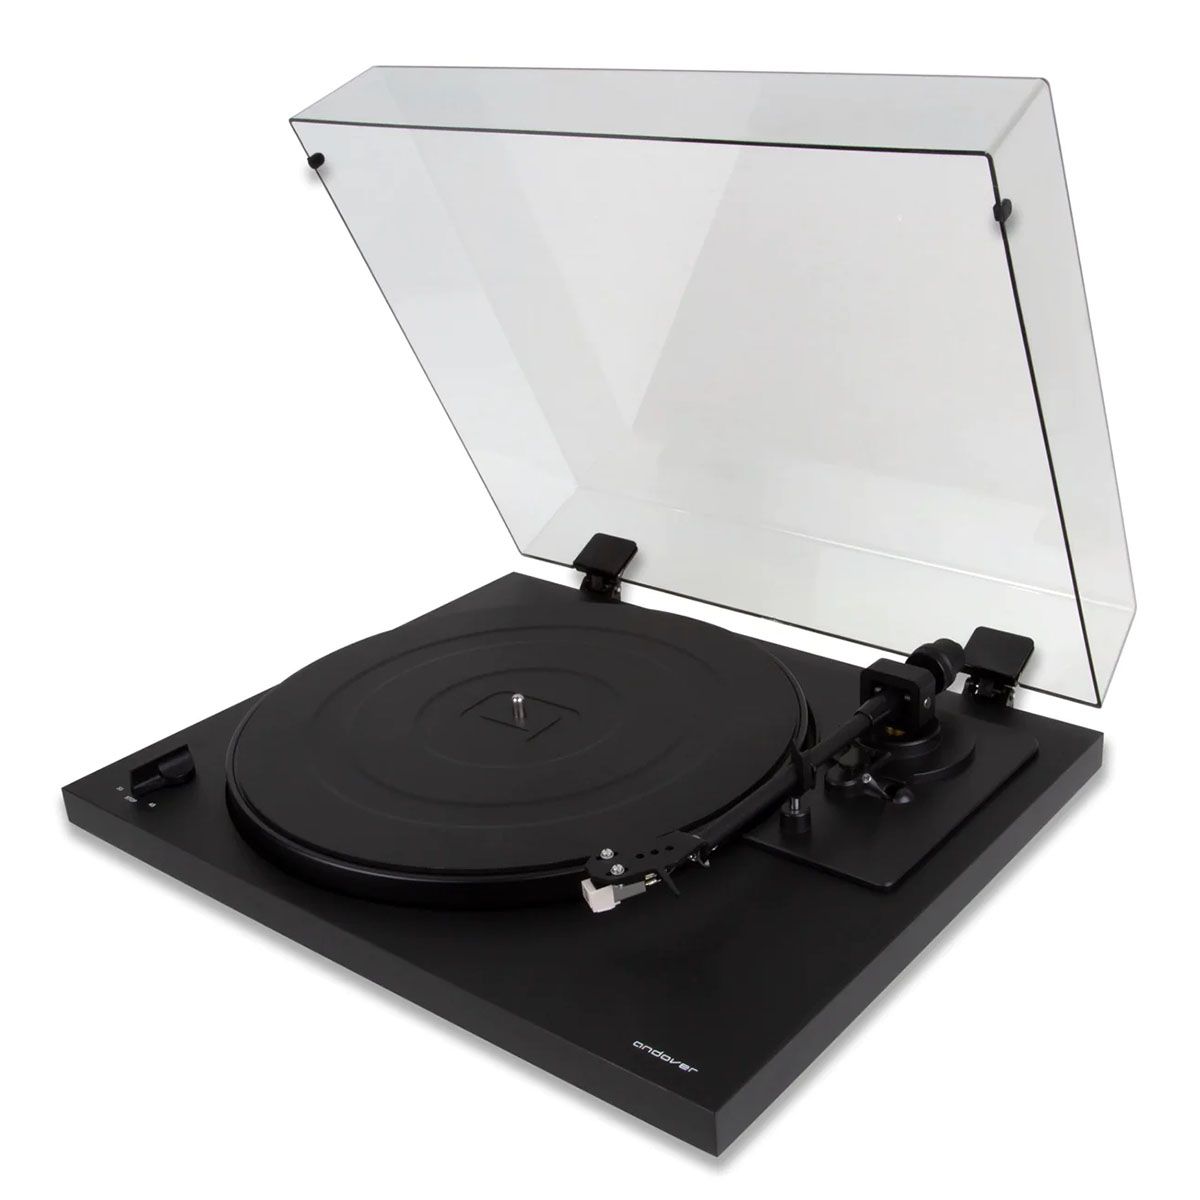 Andover Audio SpinDeck 2 Semi-Automatic Turntable - black with open dustcover, angled front-right view